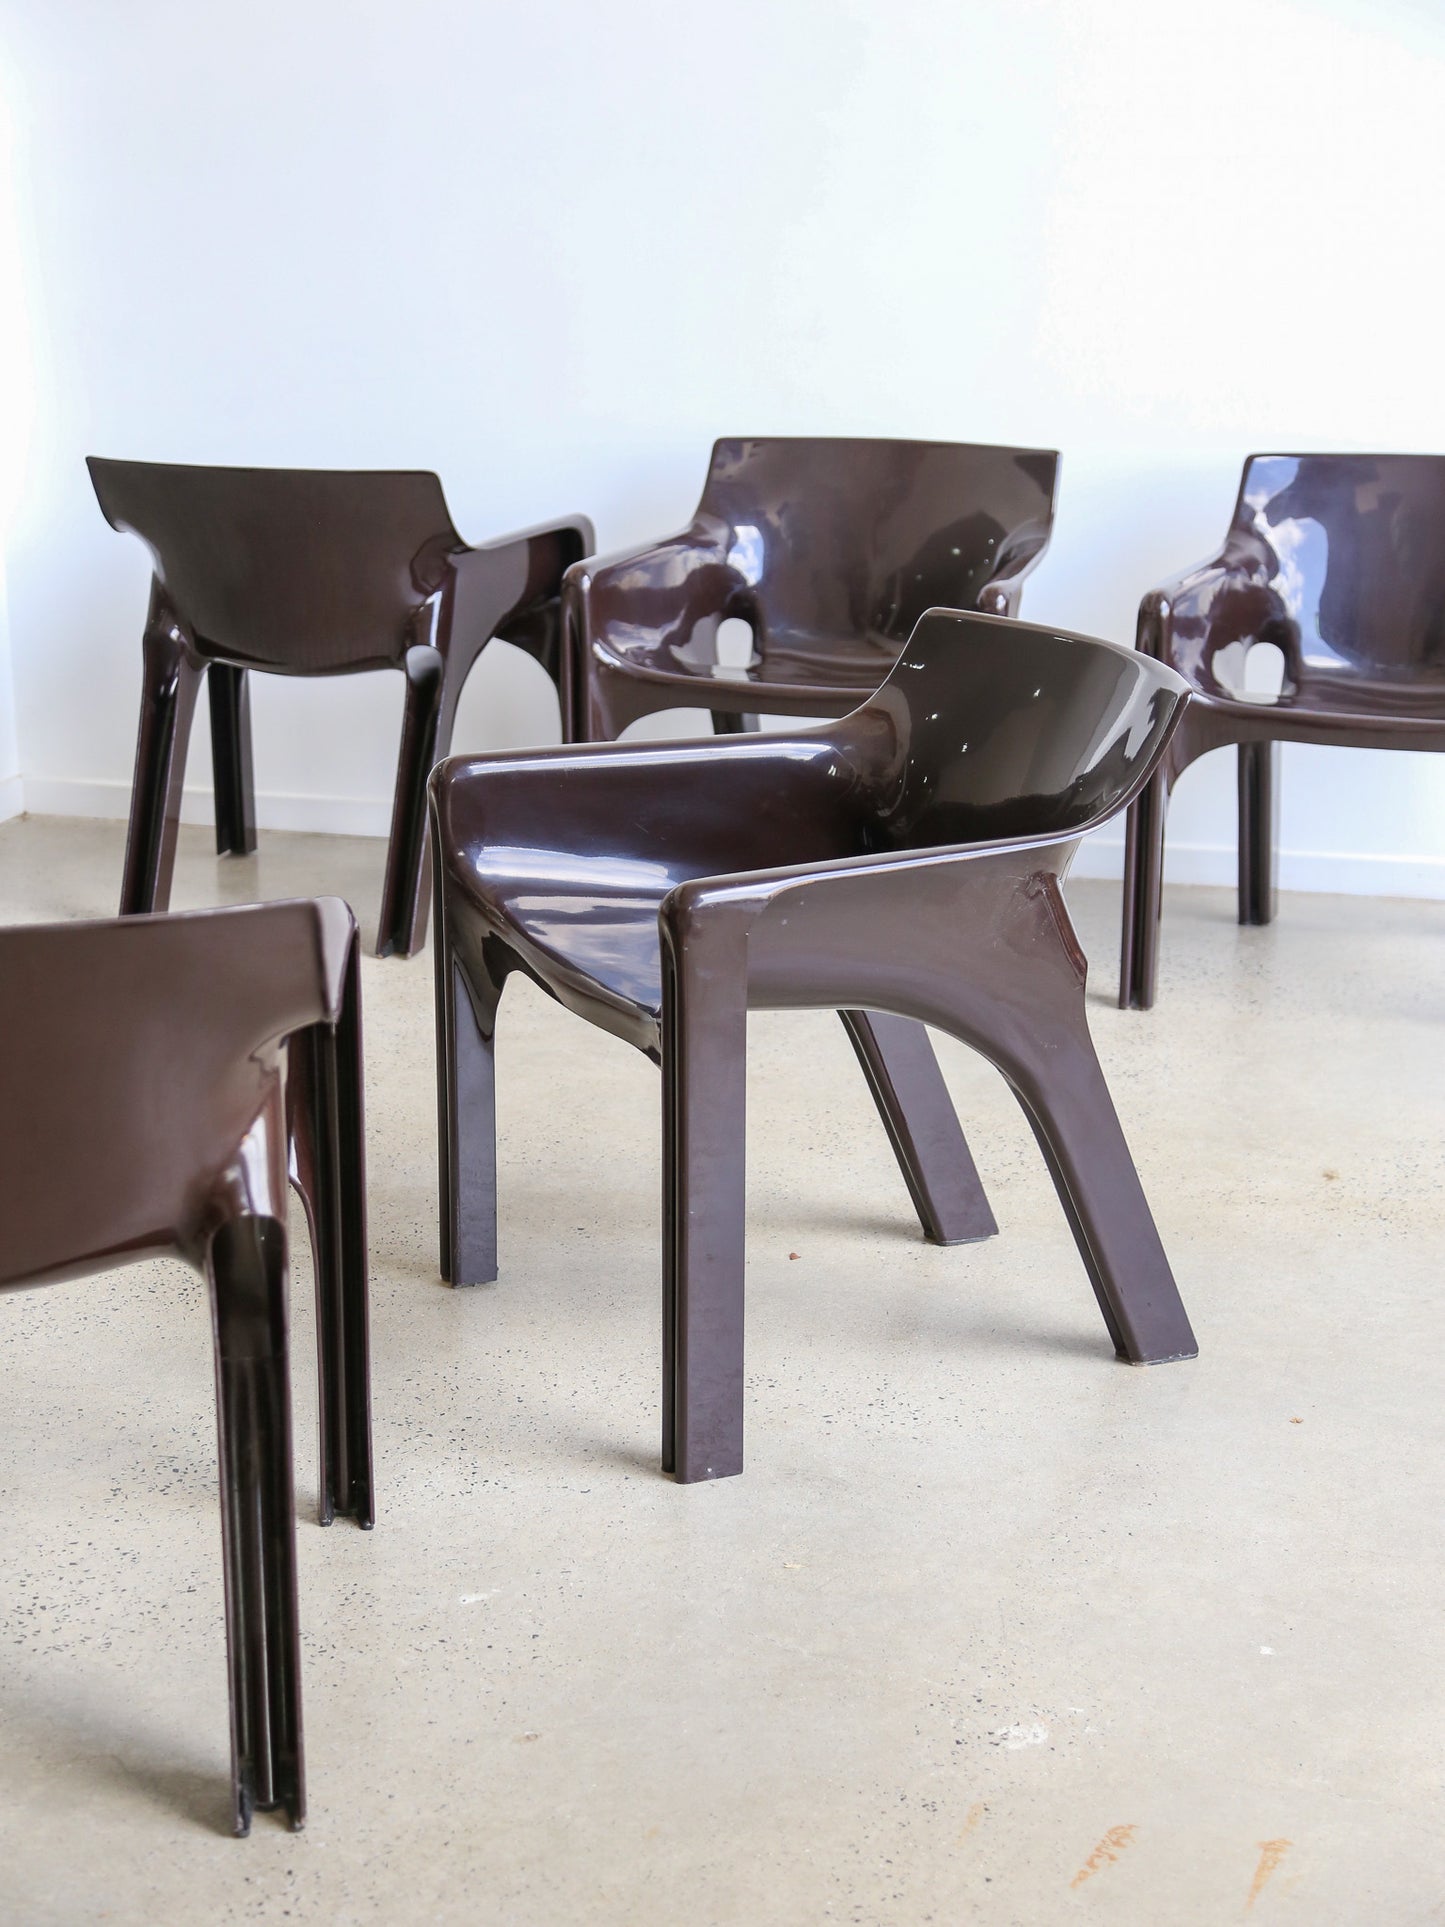 "Gaudi" Brown Chairs by Vico Magistretti for Artemide Set of Five 1970s